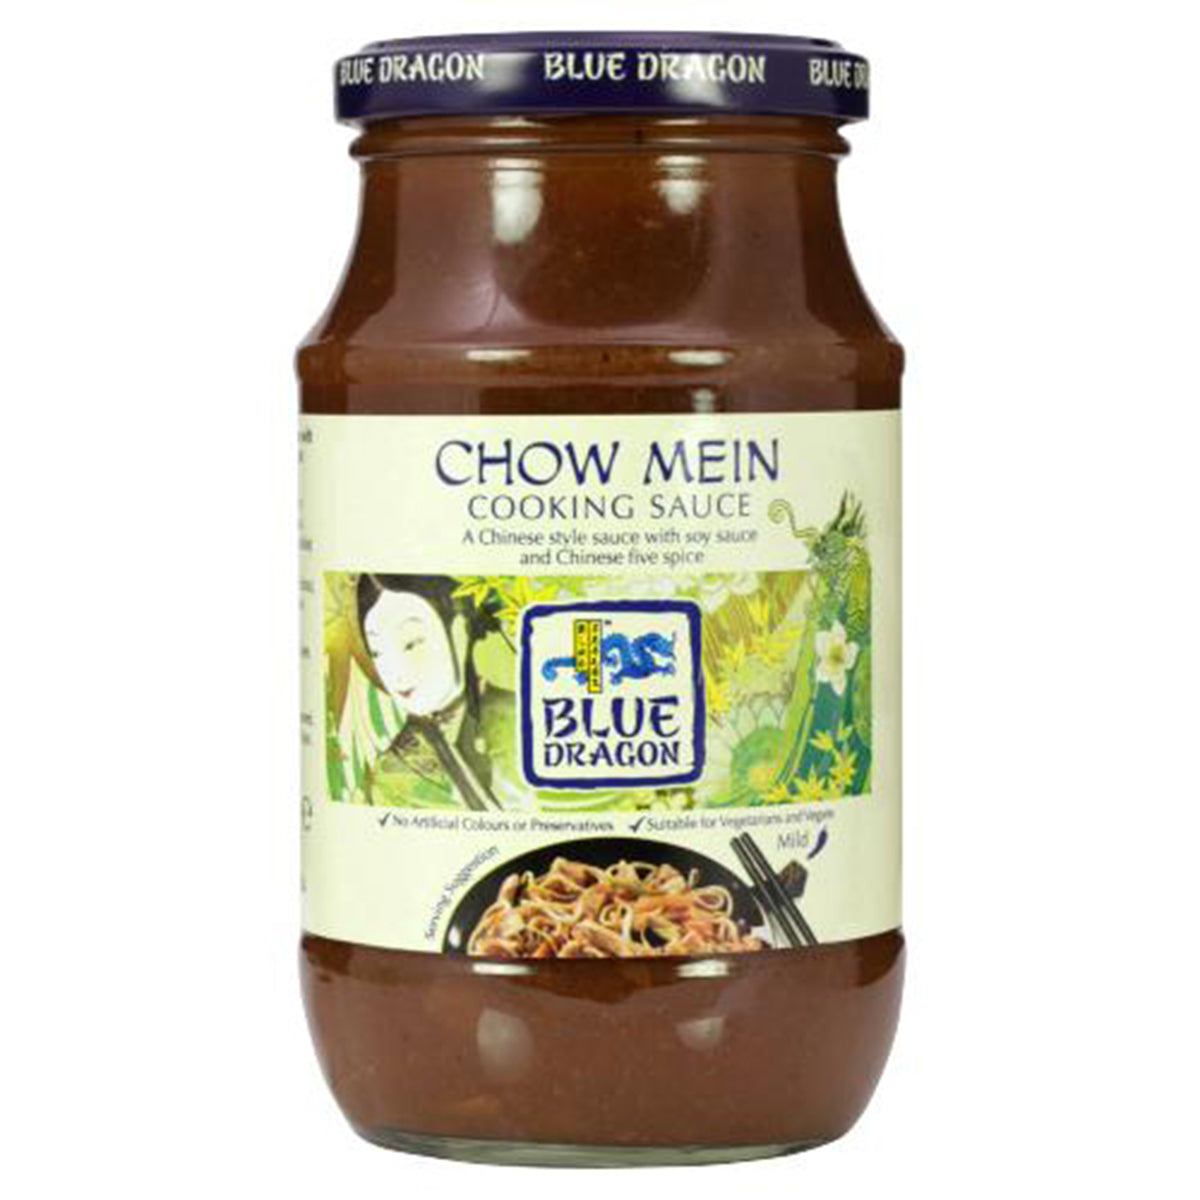 A jar of Blue Dragon - Chow Mein Cooking Sauce - 425g.